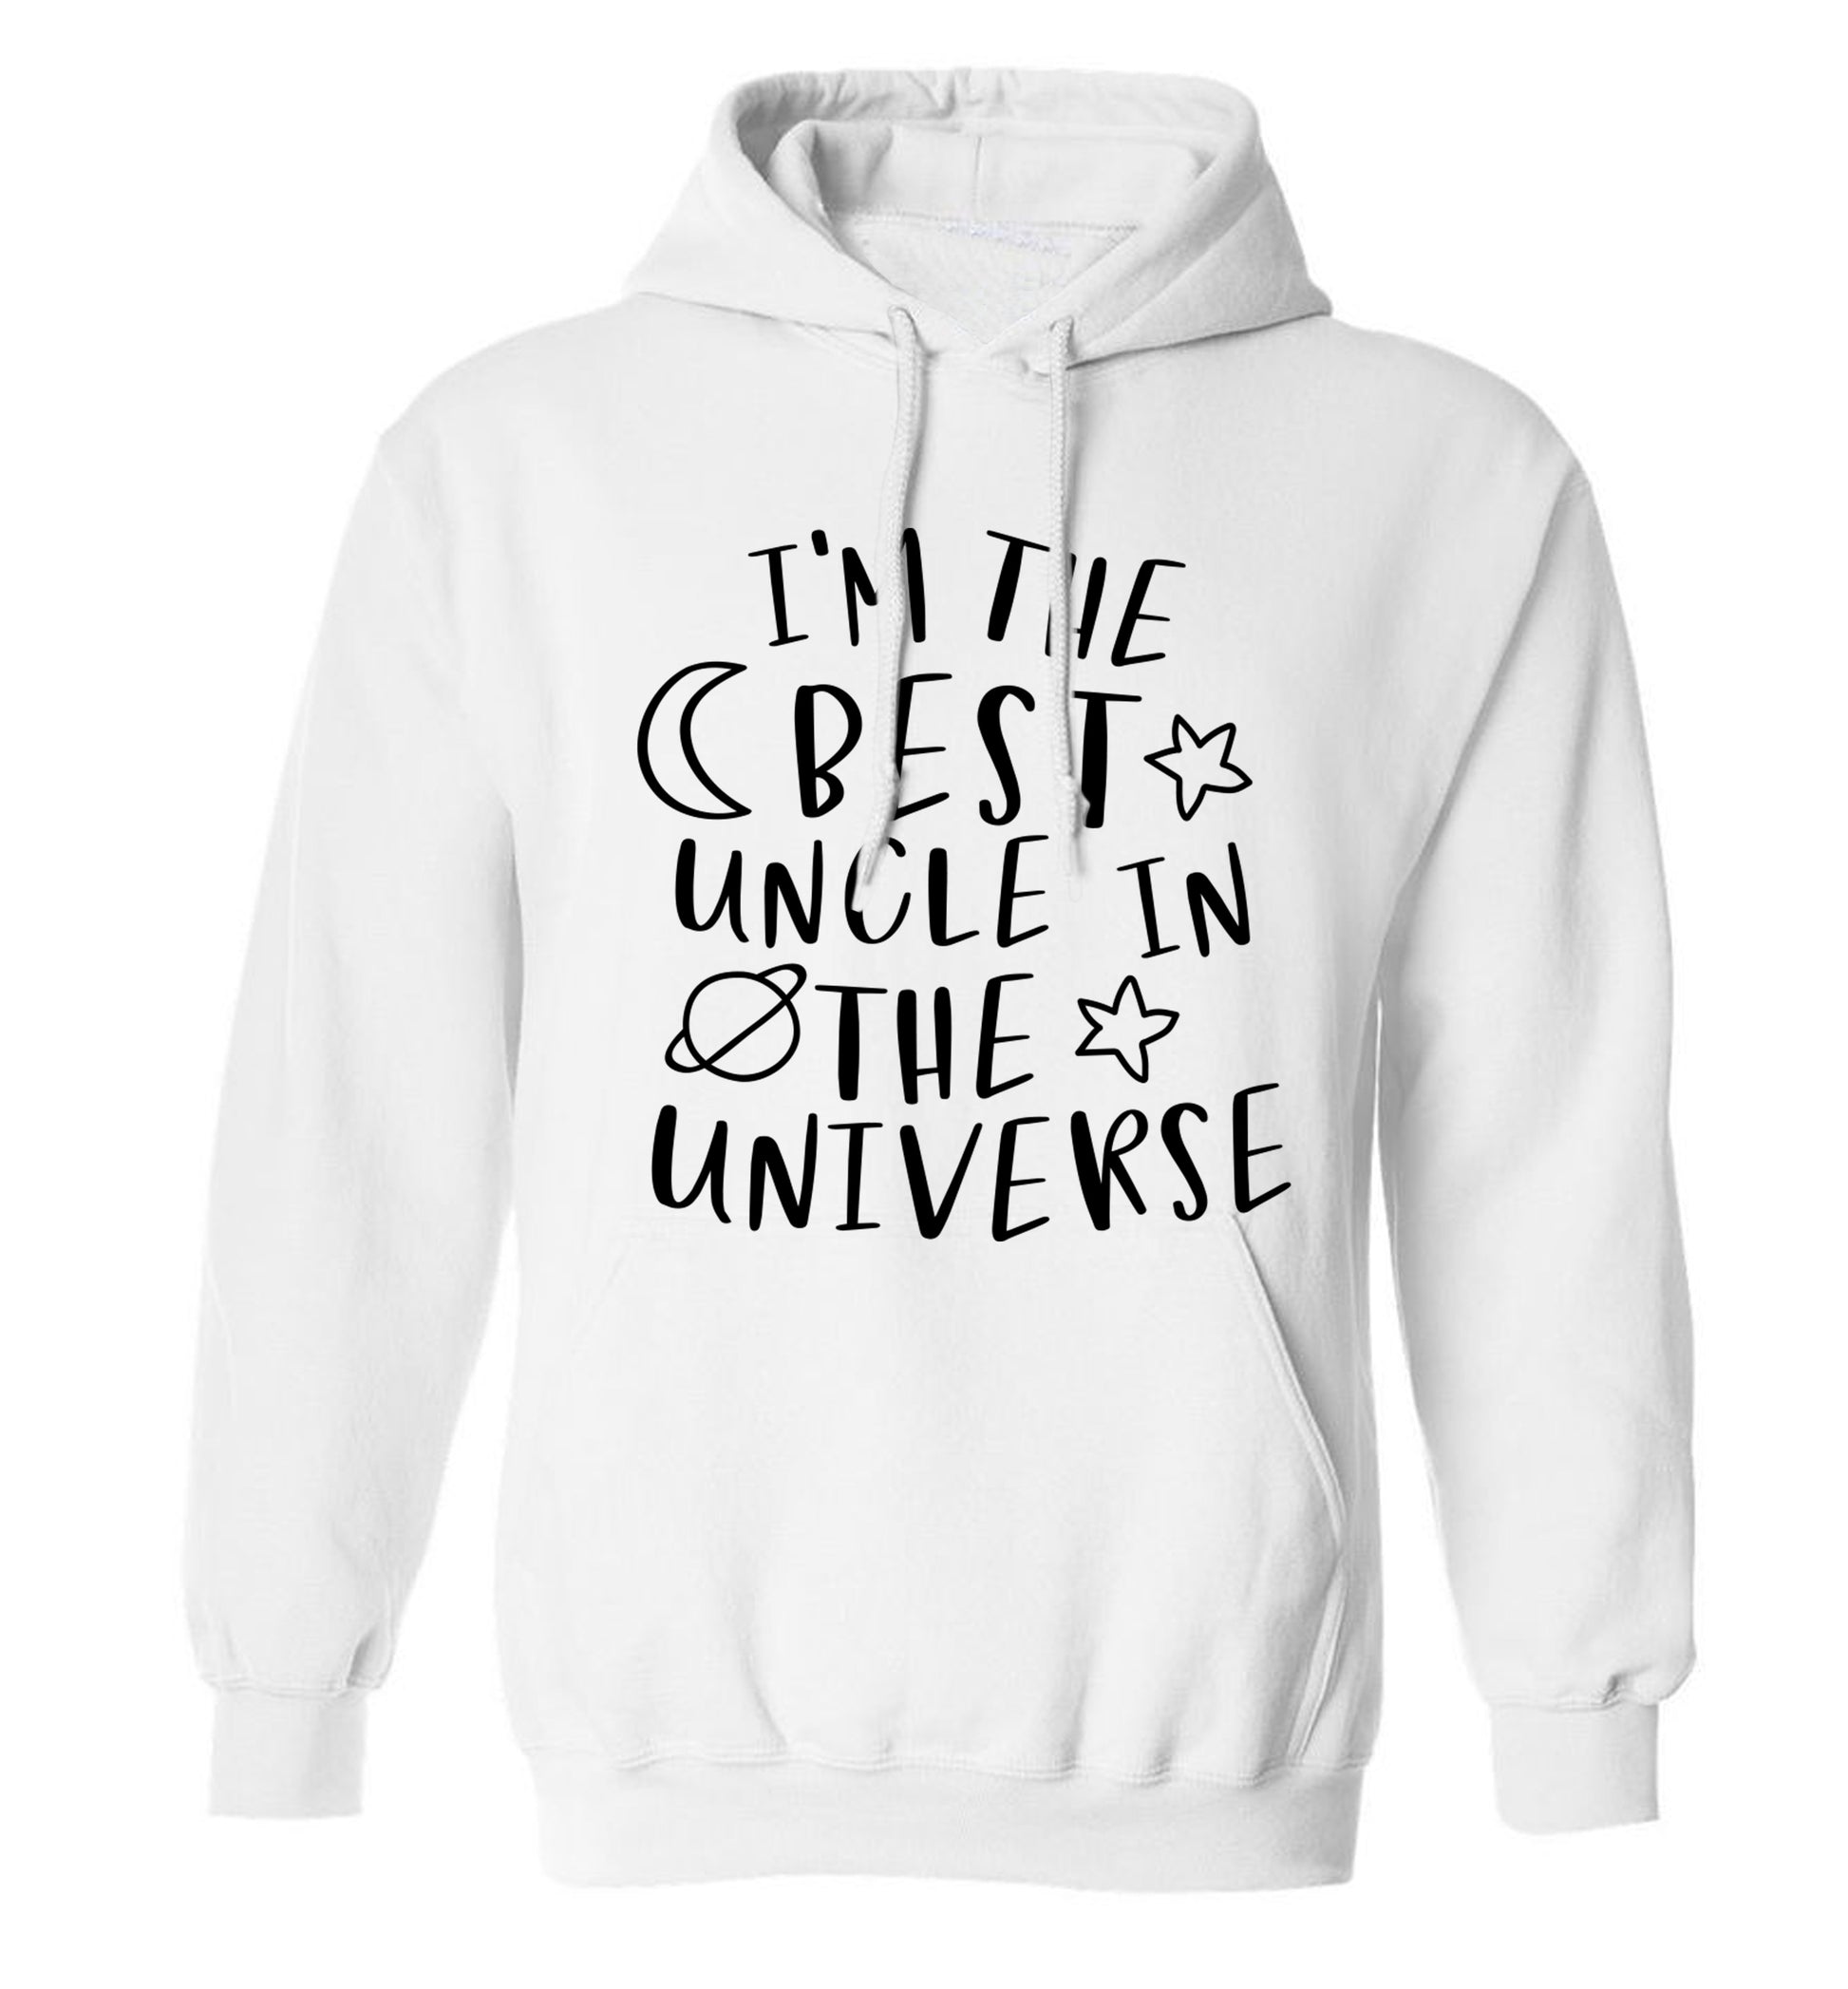 I'm the best uncle in the universe adults unisex white hoodie 2XL